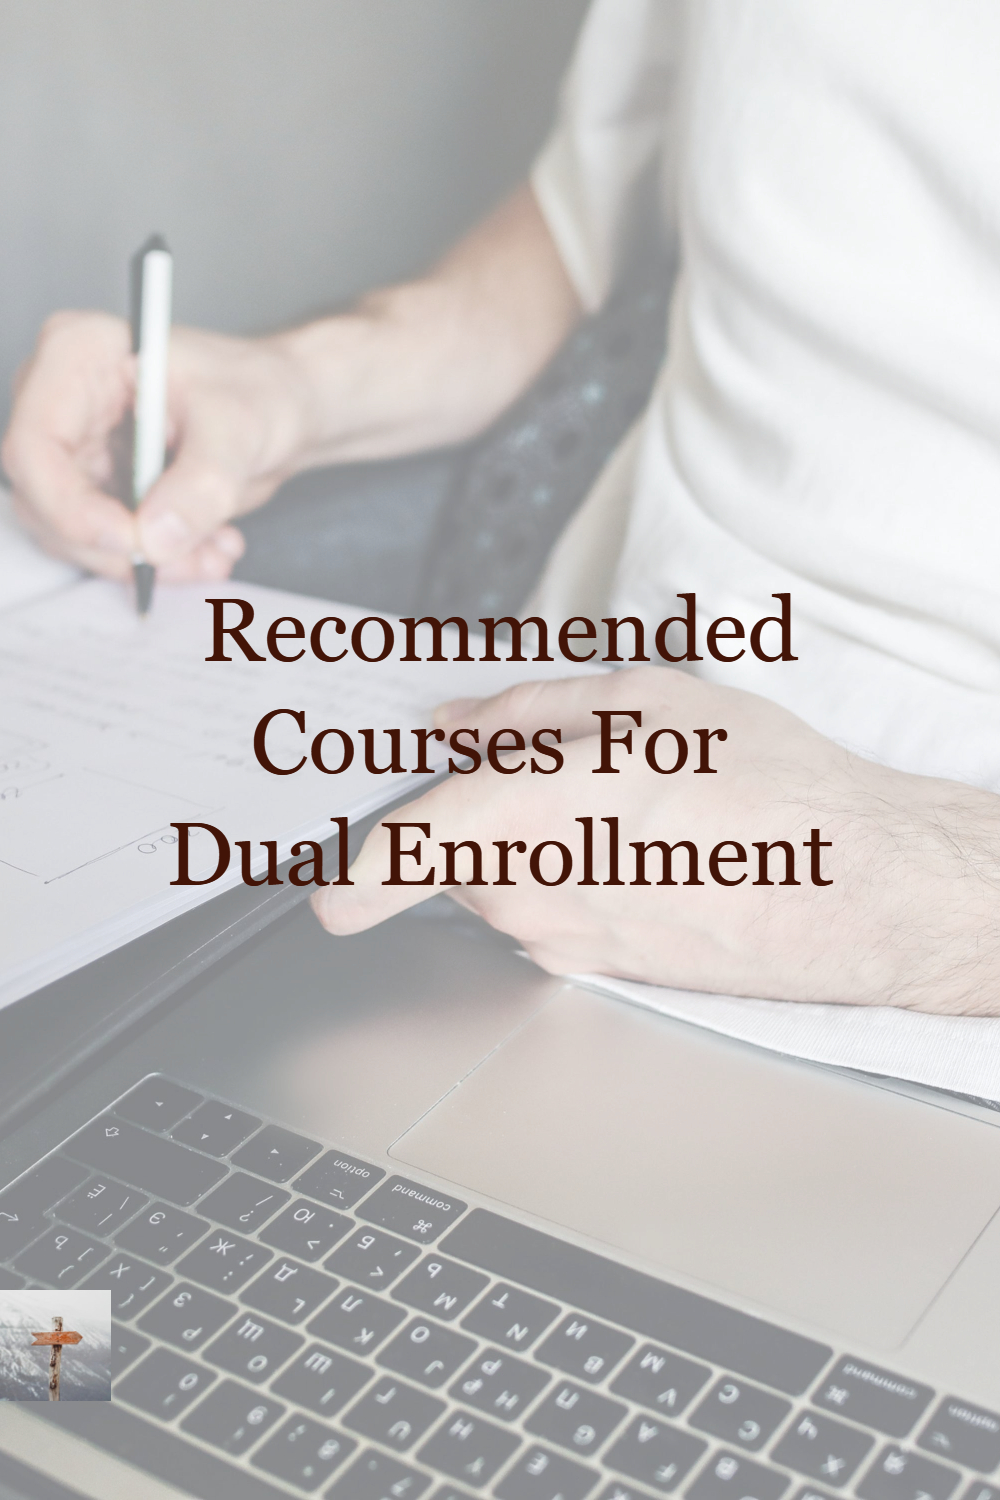 How to Choose Great Dual Enrollment Courses